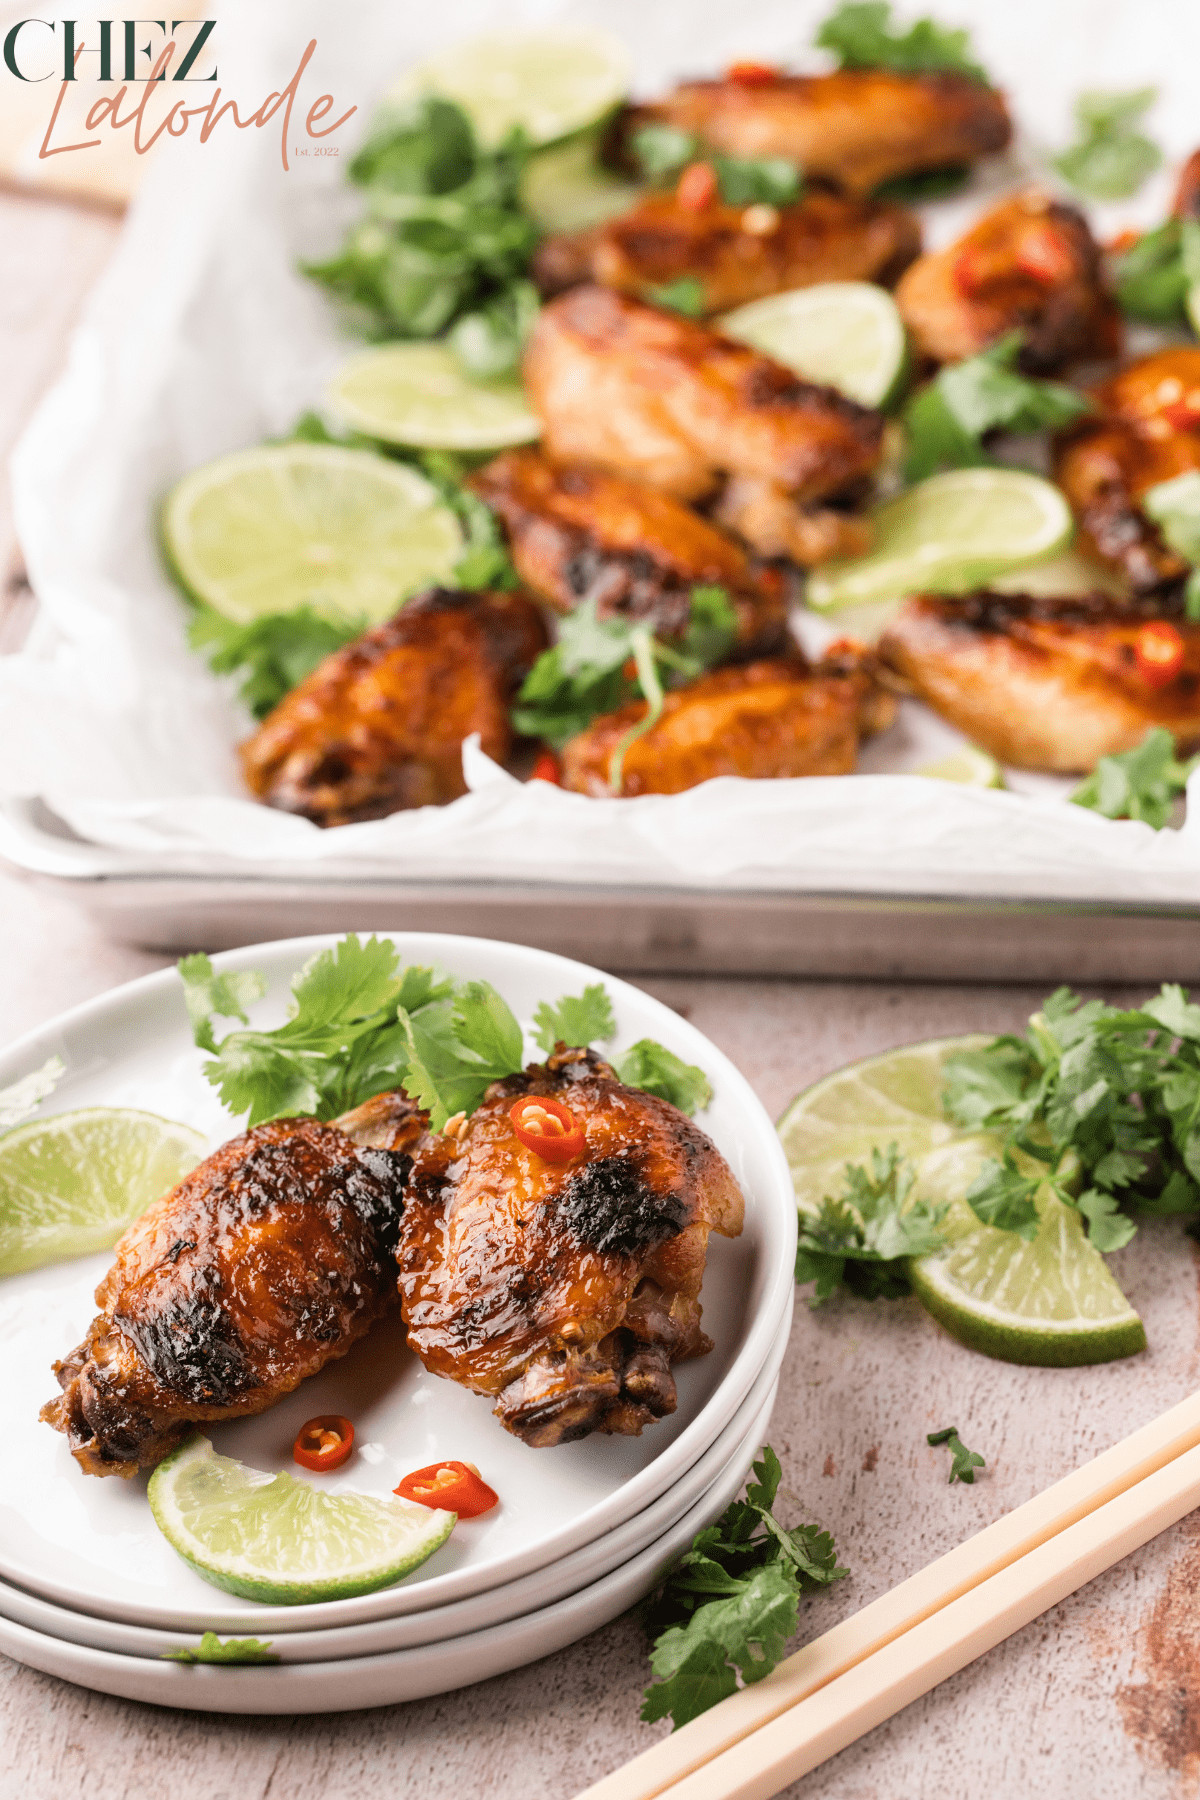 Chez Lalonde Lemongrass Chicken Wings sitting on a cooking tray and 2 wings are on a stacks of small white plates. There are some limes, cilantro and chopsticks